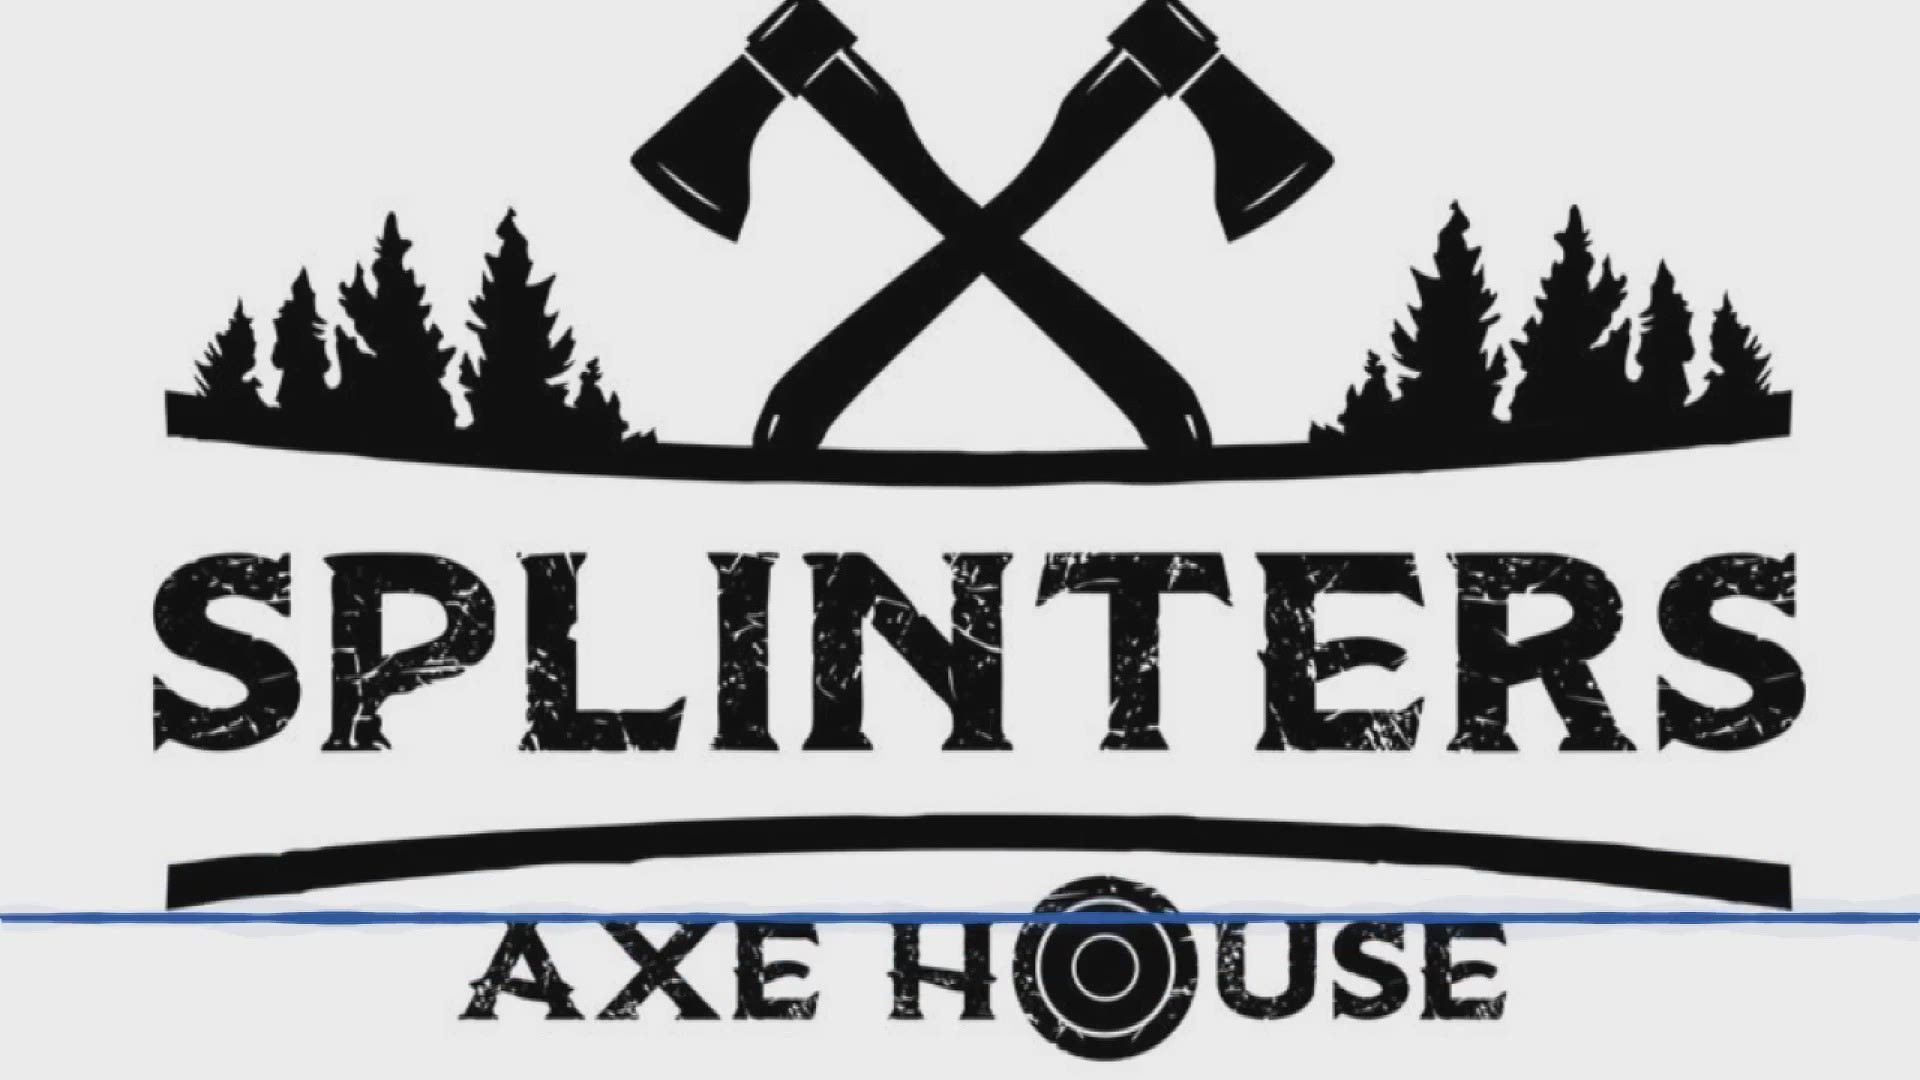 Splinters Axe House is coming to Warner Robins this October